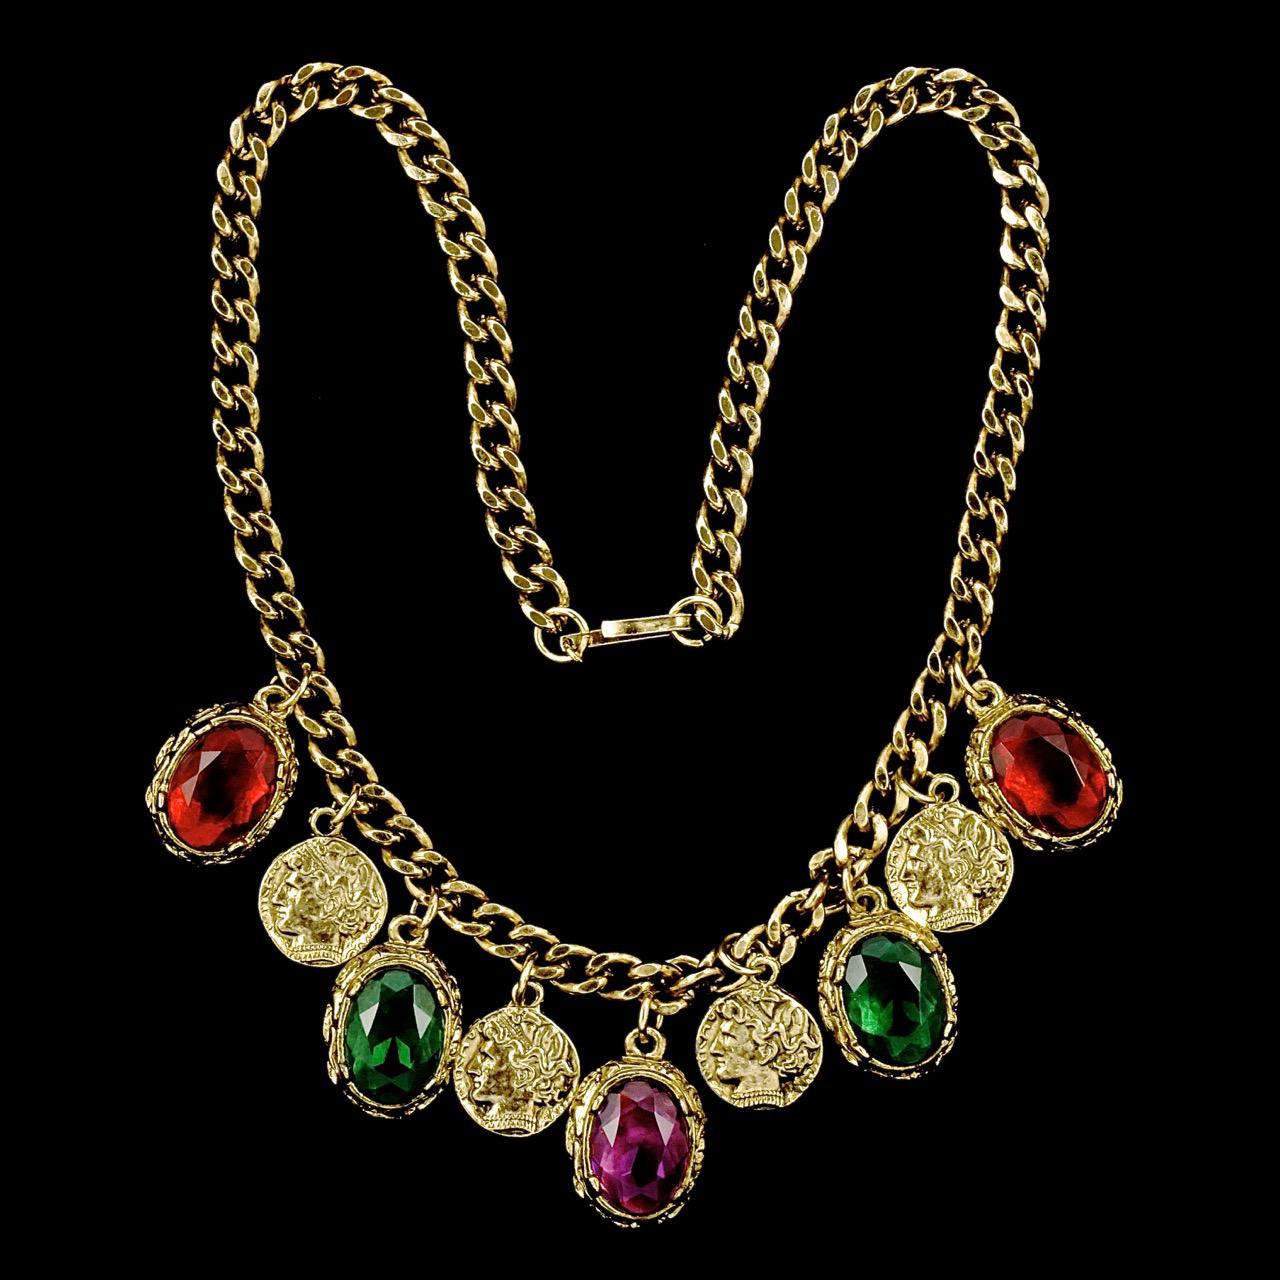 Gold Plated Curb Chain Necklace with Glass Jewel and Coin Drops, circa 1980s For Sale 6